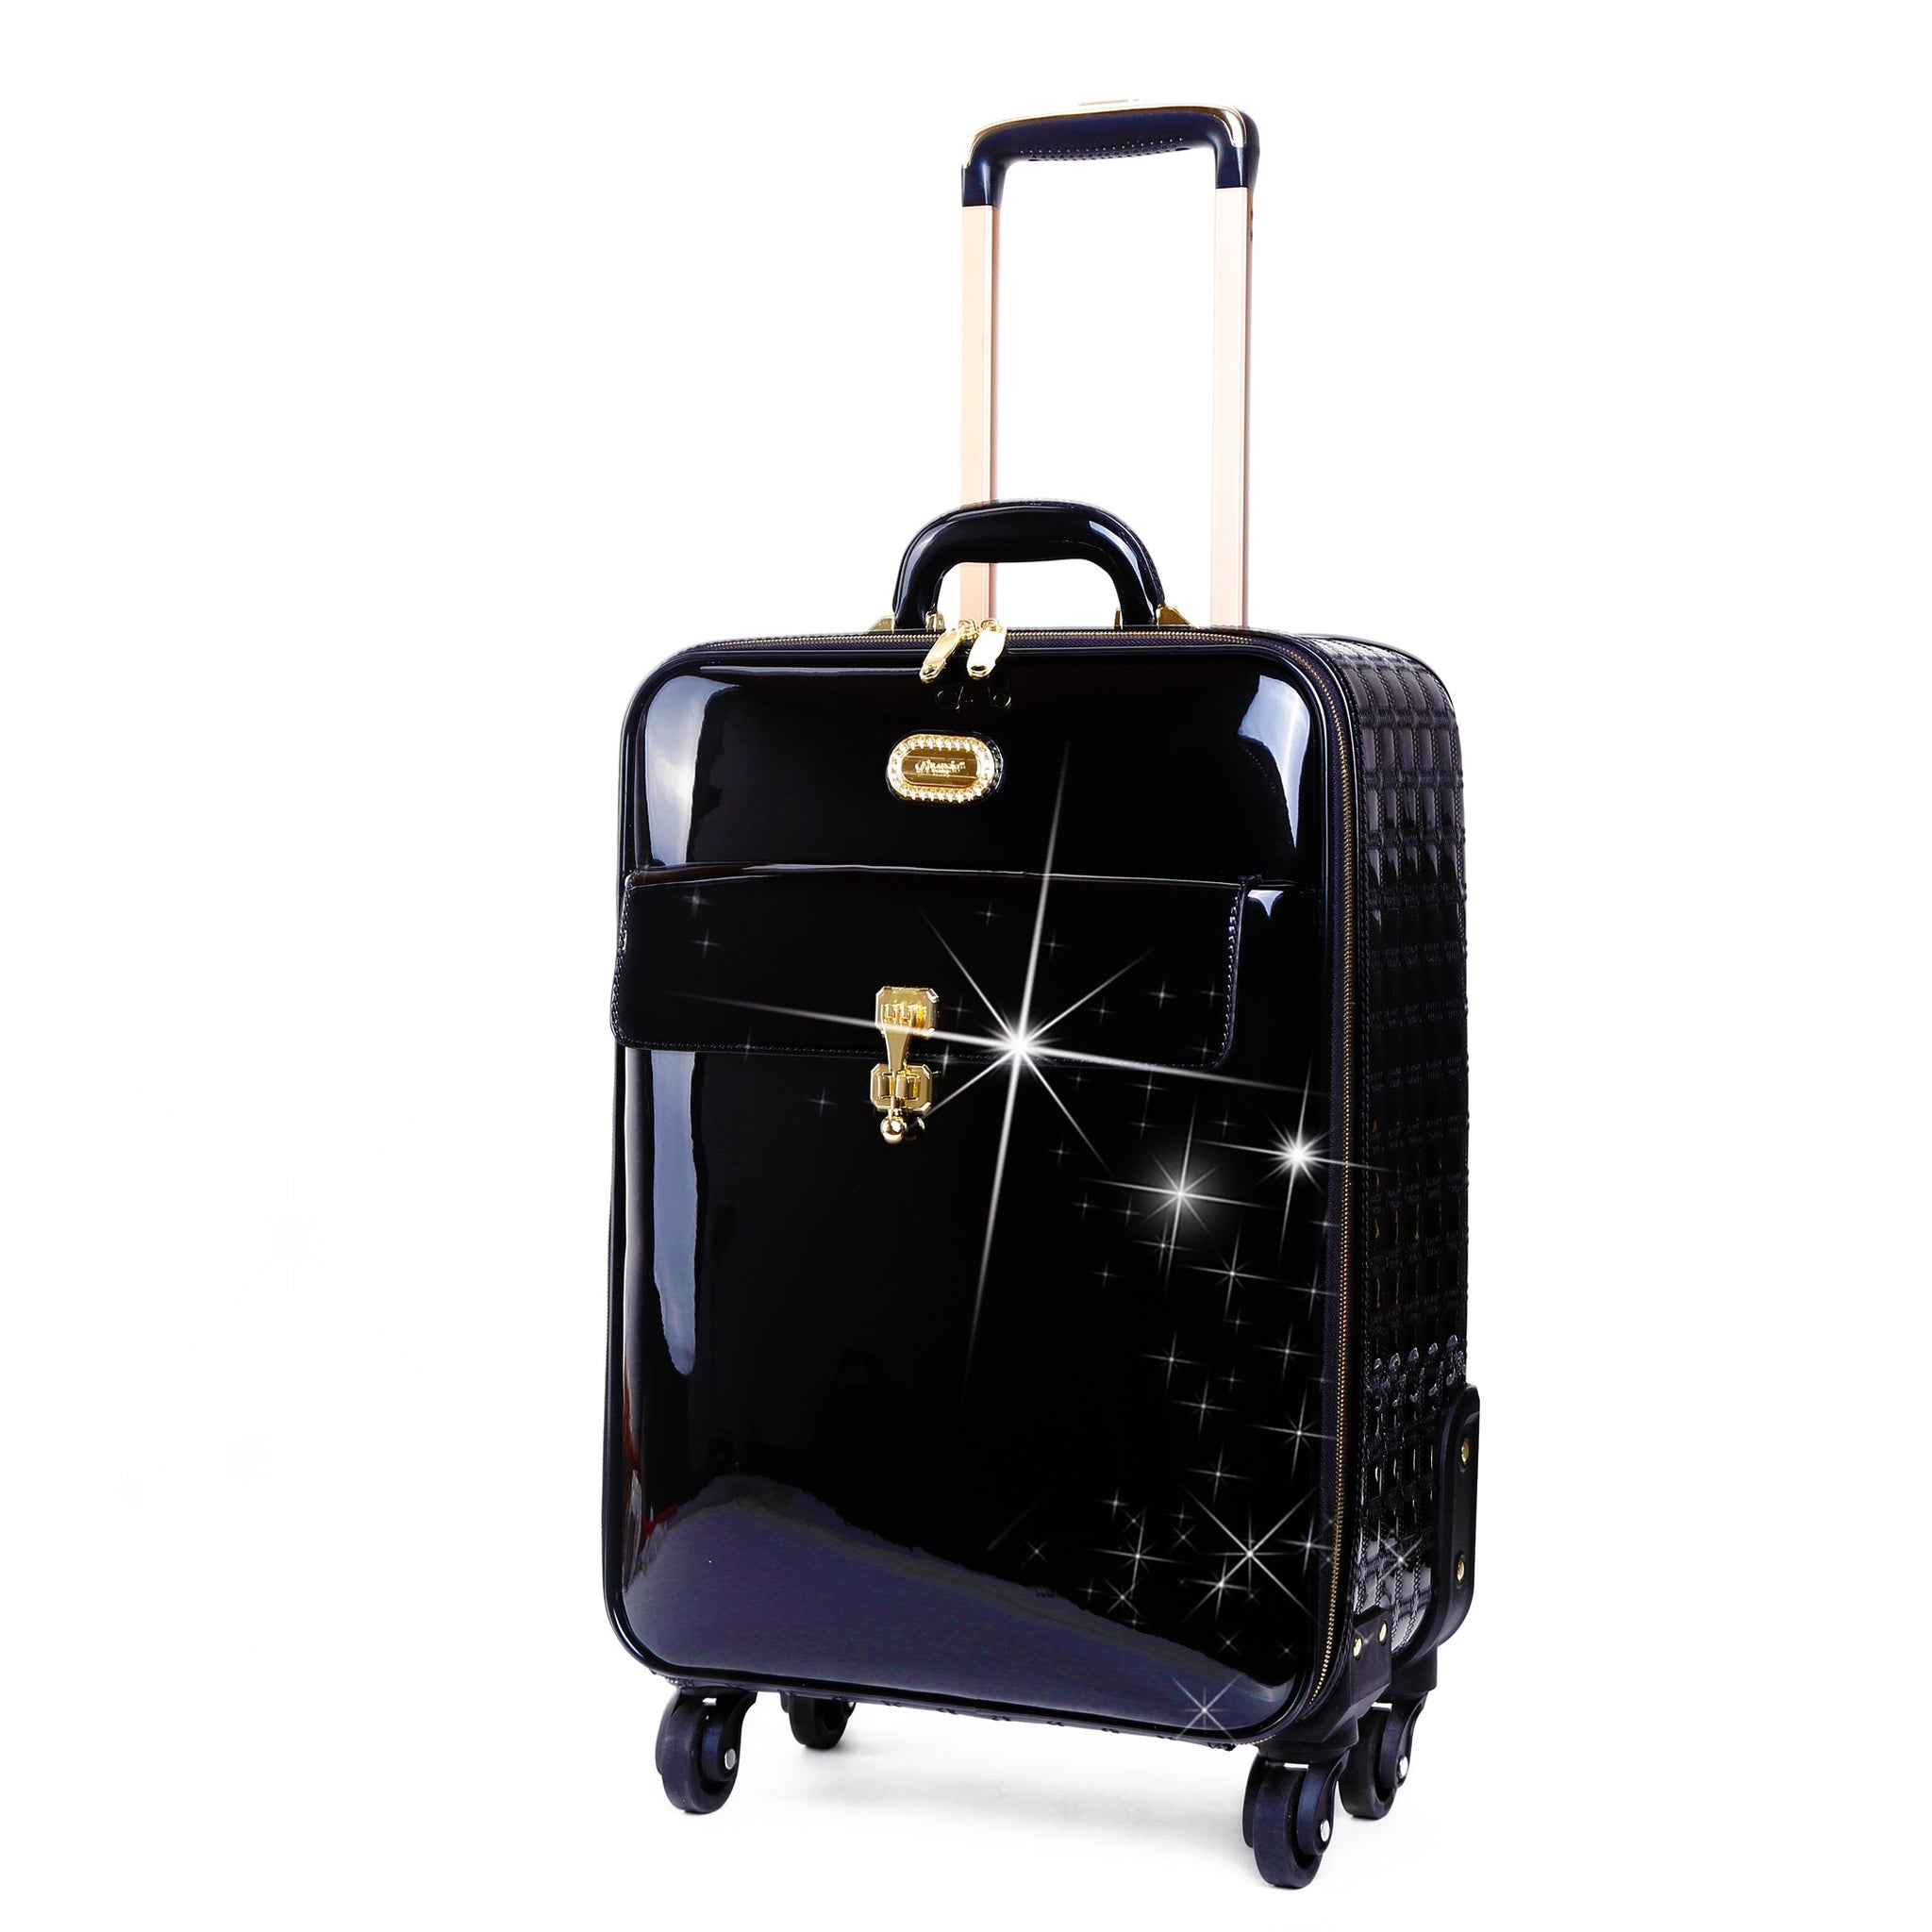 Euro Moda Underseat Travel Luggage With Spinners